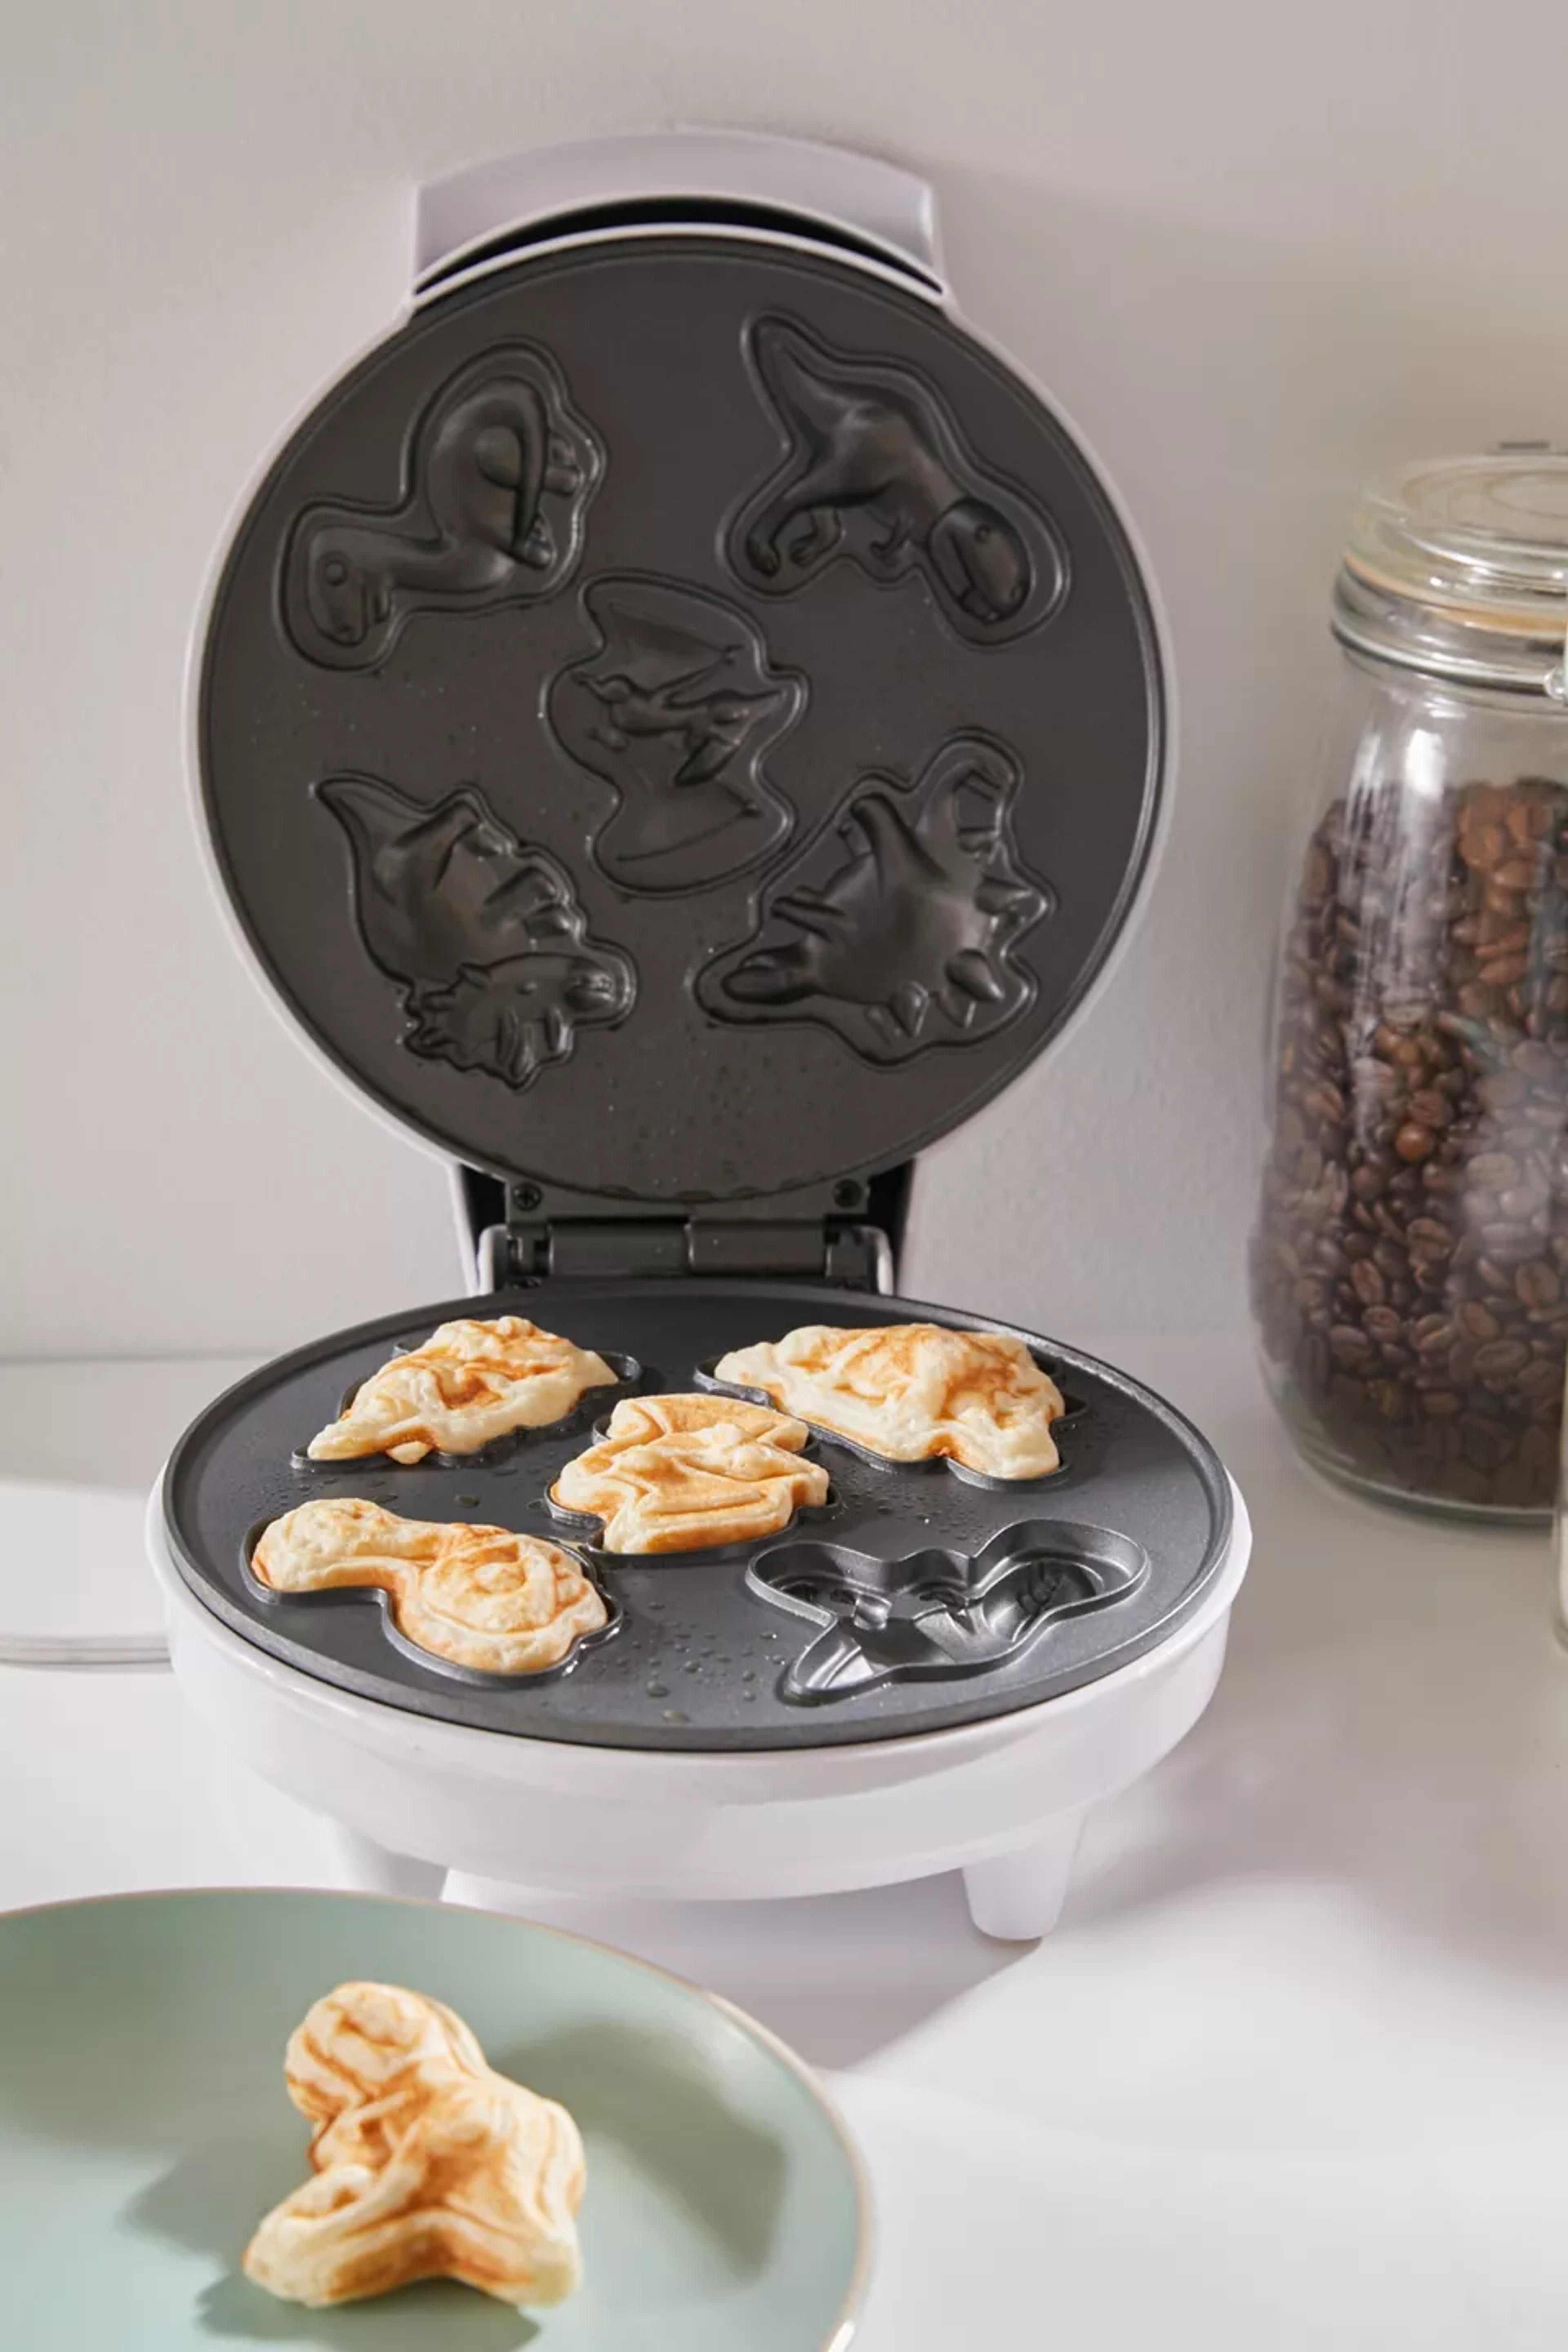 Dinosaur Waffle Maker | Urban Outfitters